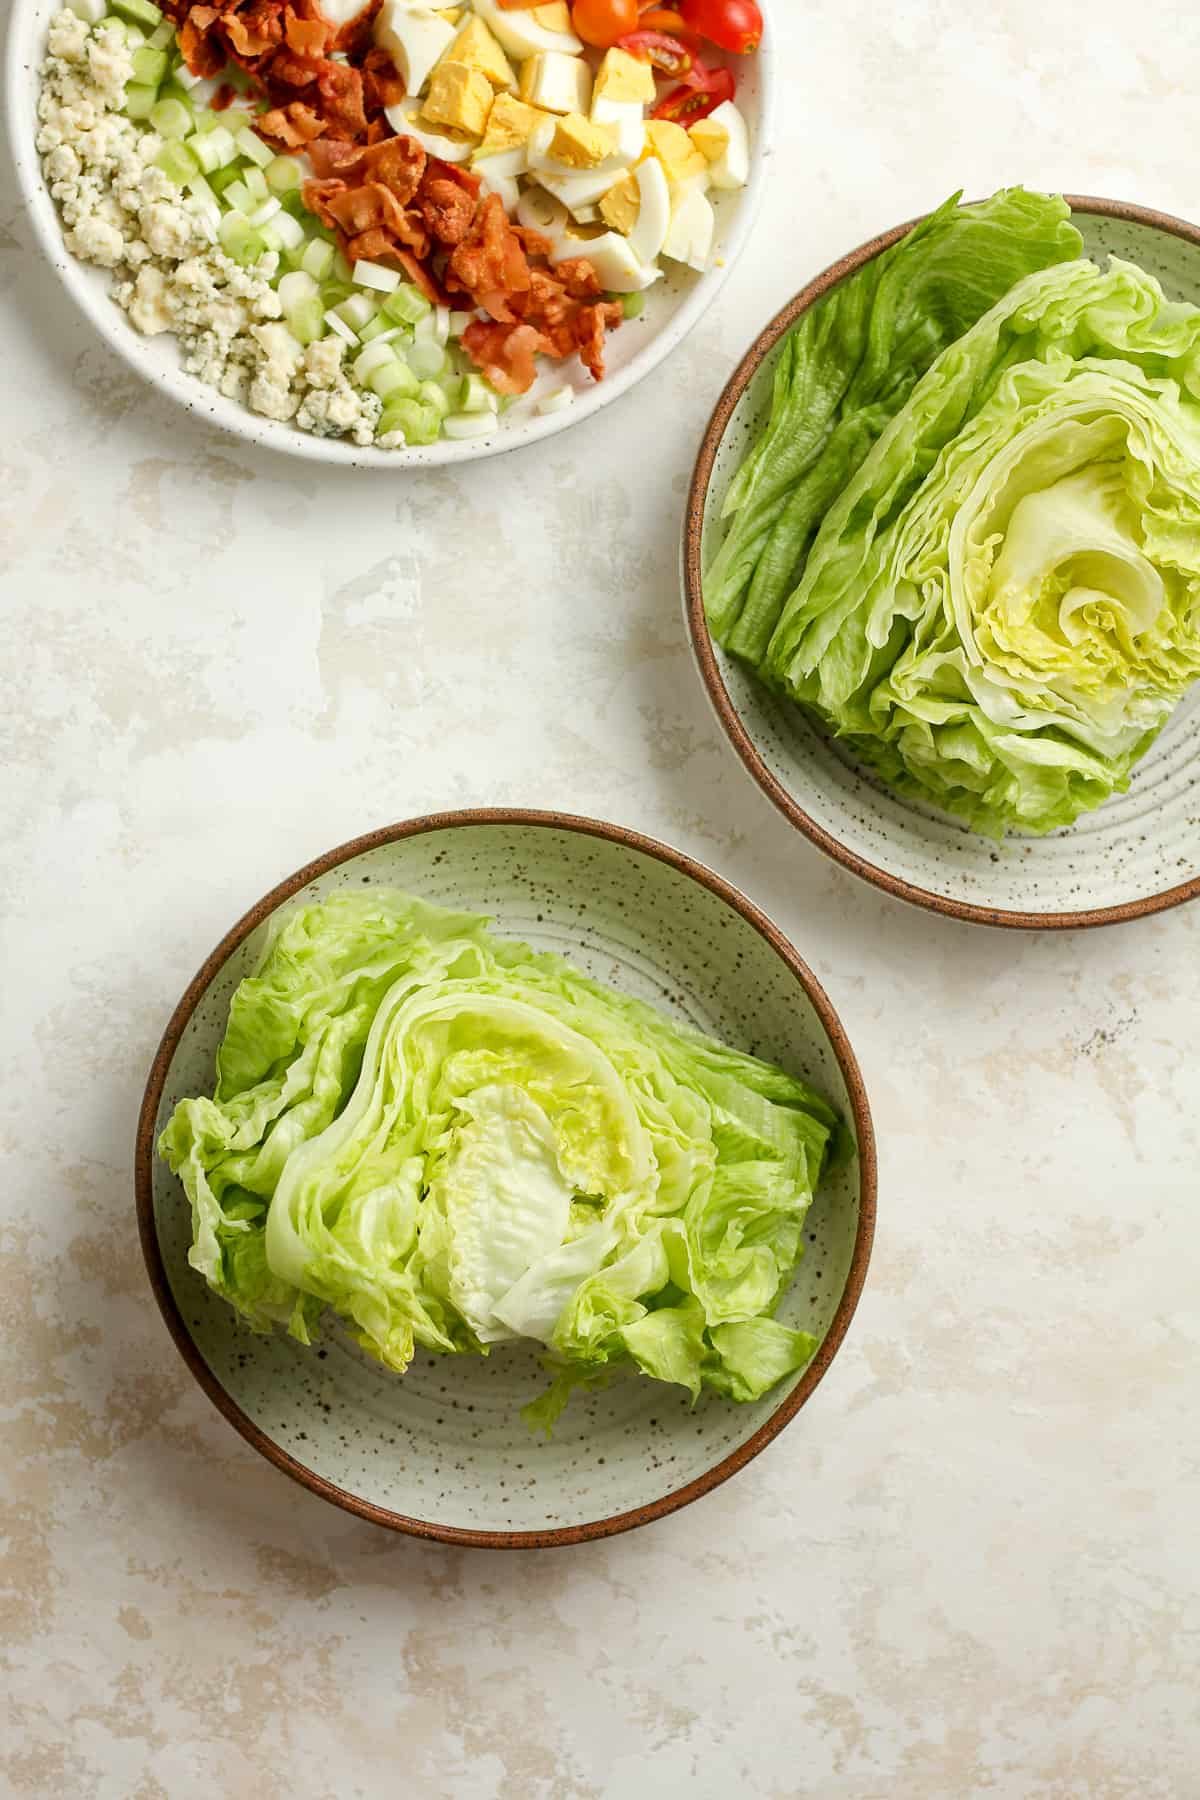 Two bowls of the iceberg lettuce with a plate of toppings.